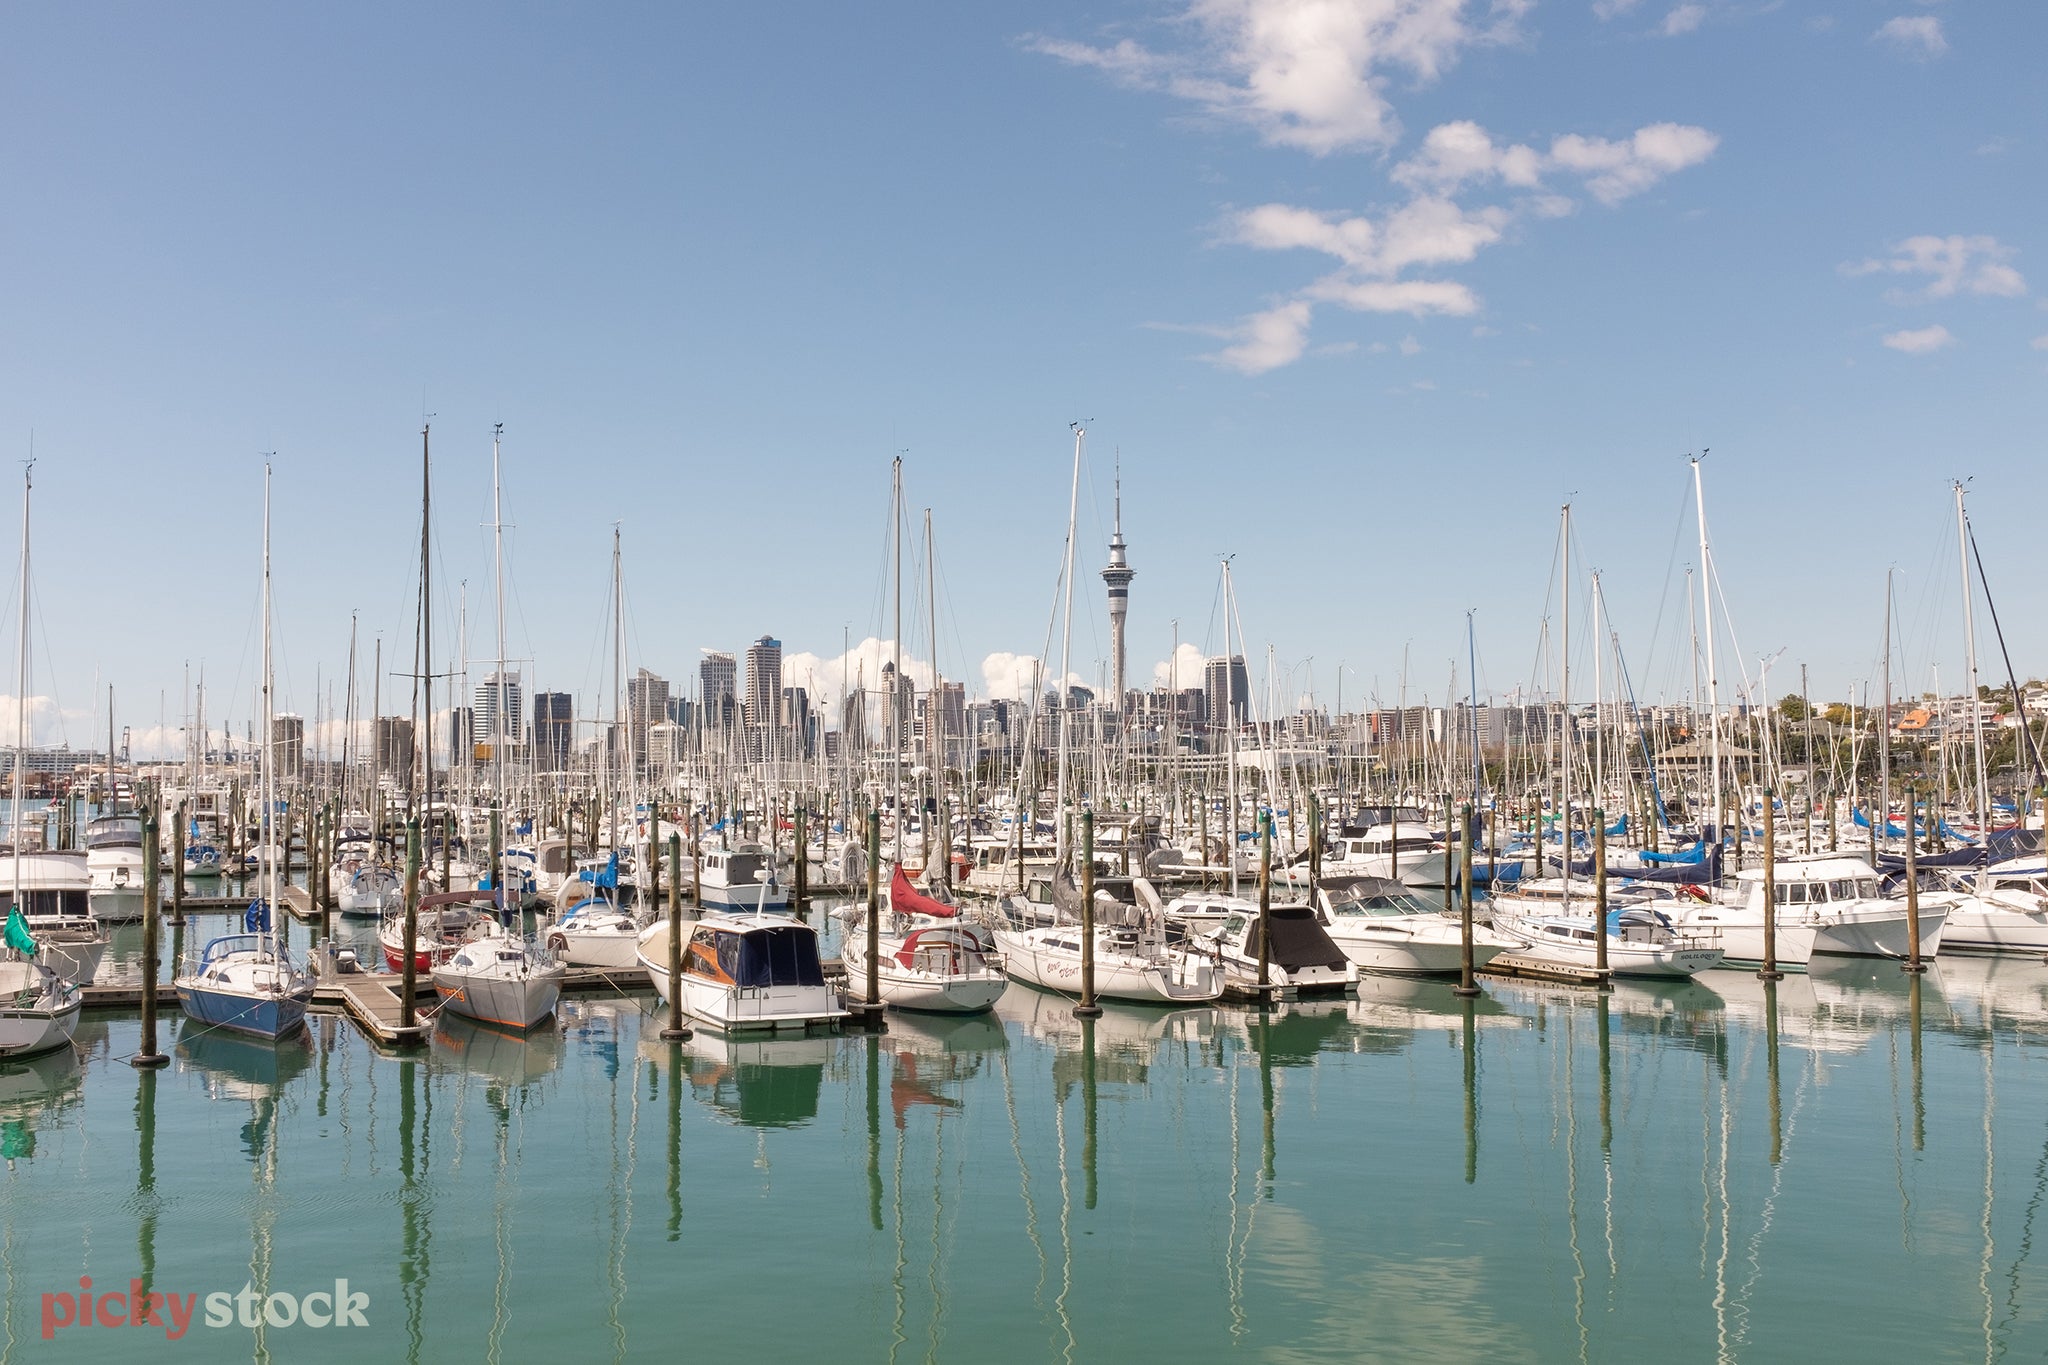 Sail boats neatly lined up and docked at a downtown Auckland Marina, the city high rises and buildings can be seen peeking up through the background. 